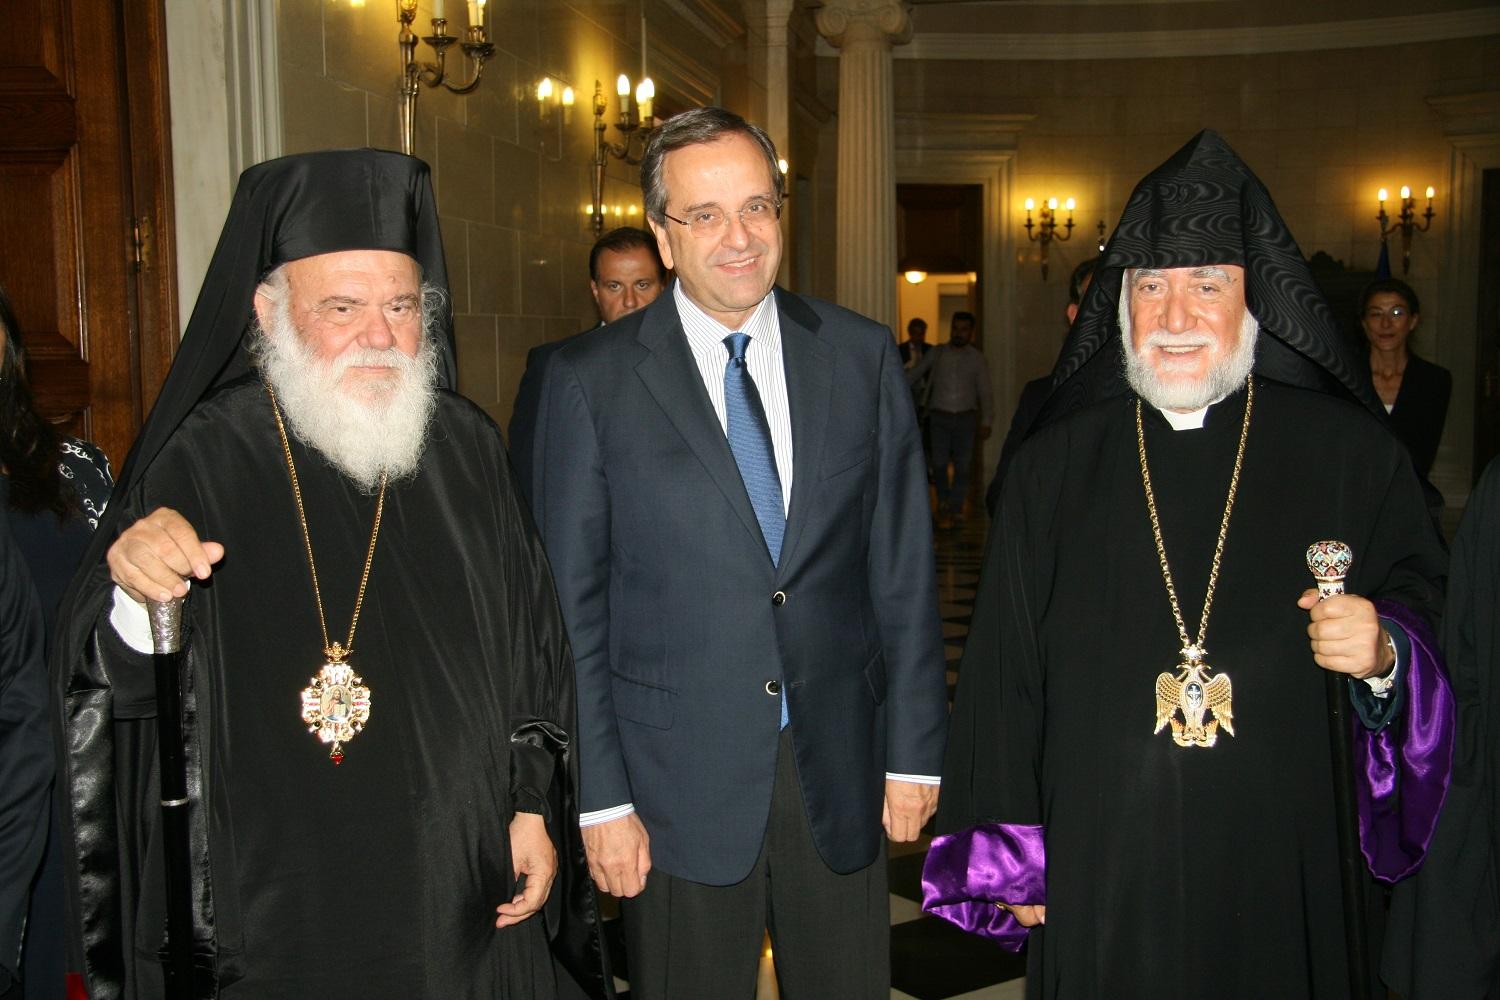 Catholicos Aram I Meets with Archbishop & Prime Minister of Greece